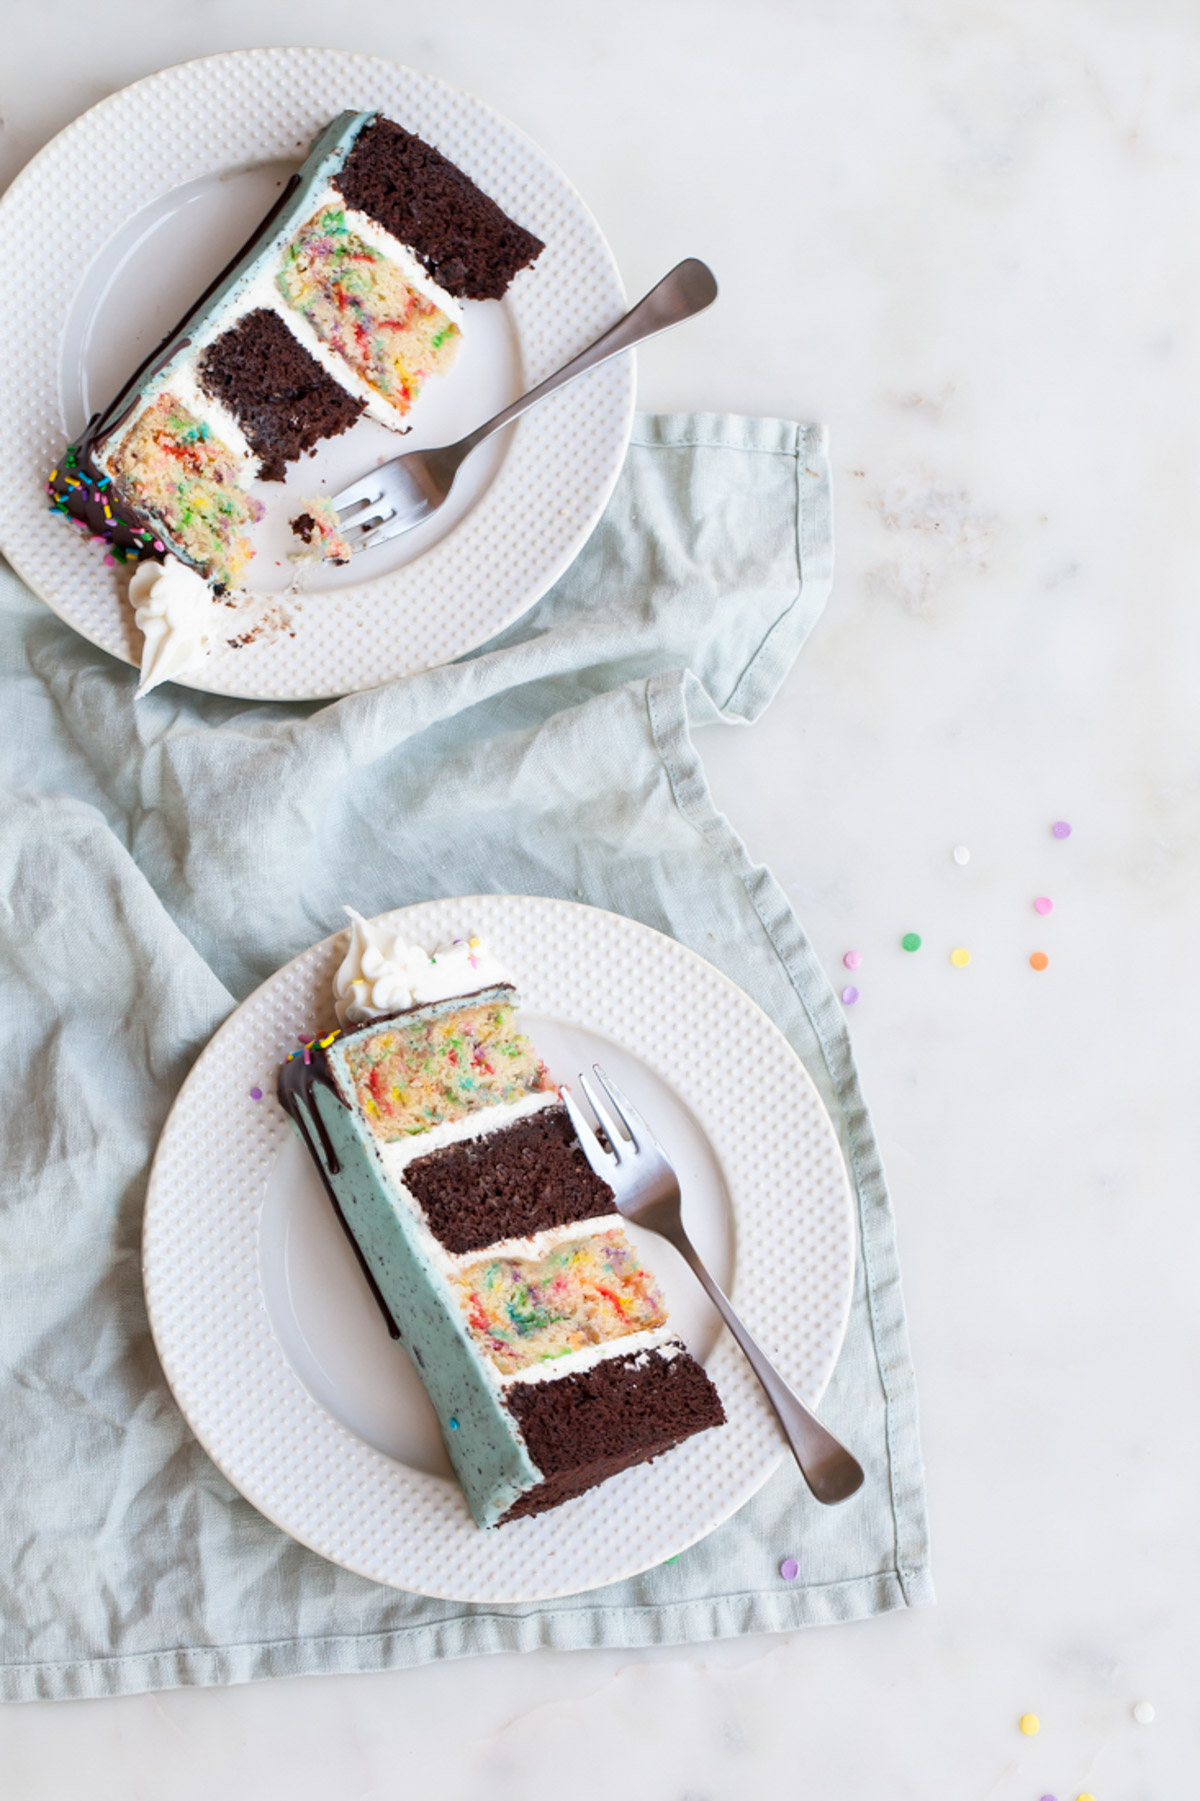 Slices of oreo confetti cake with alternating layers of chocolate and sprinkle cake